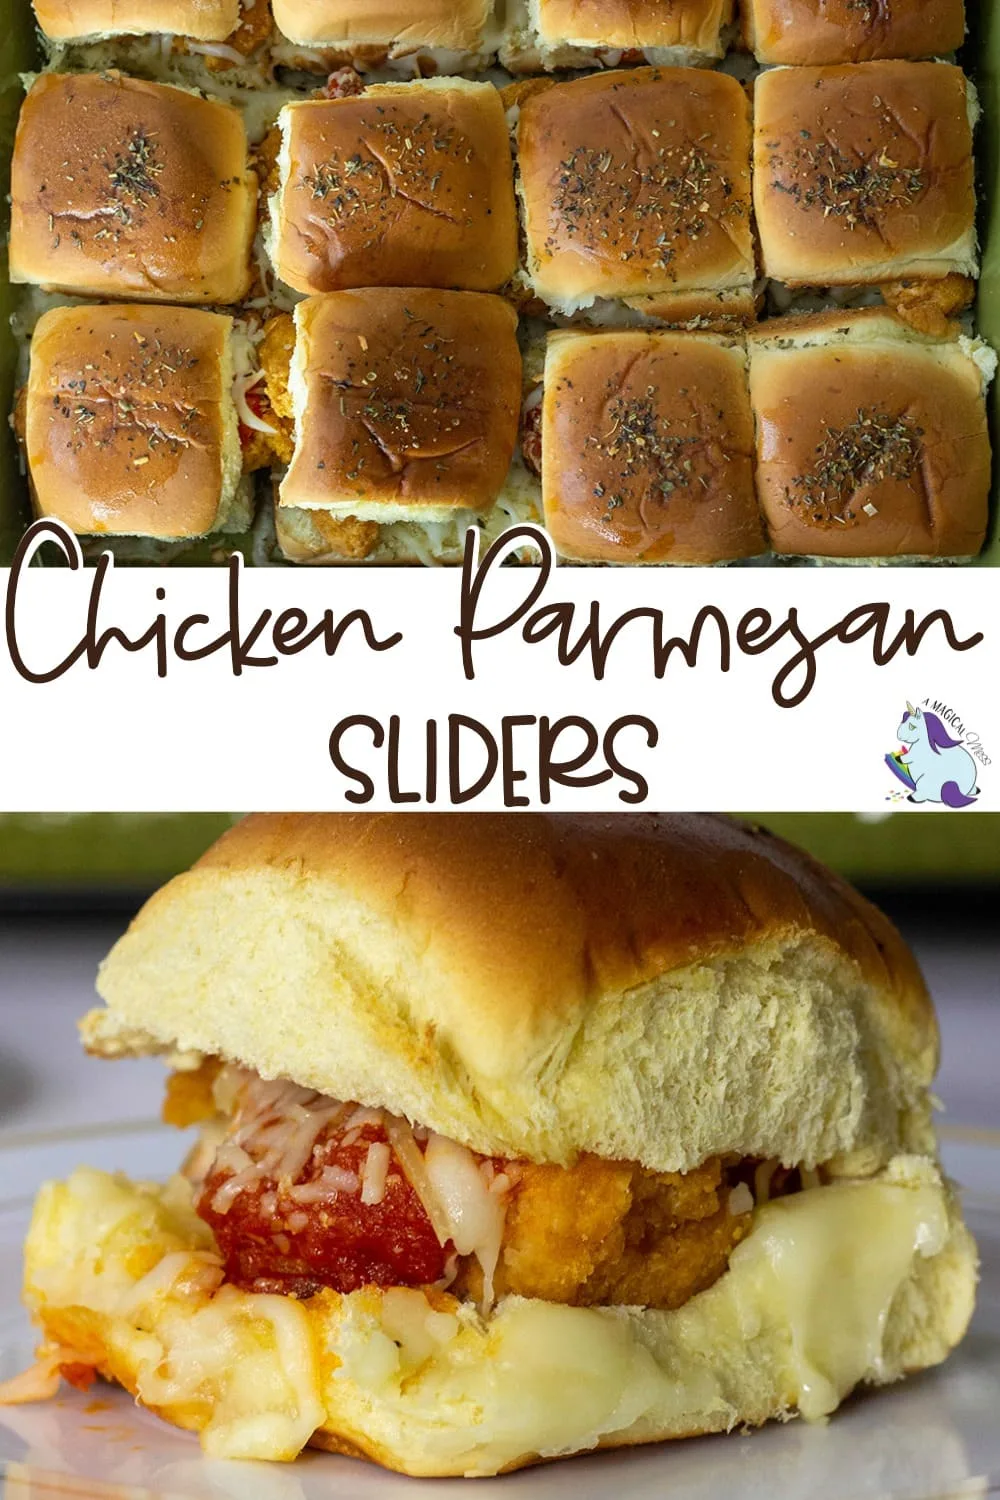 Chicken parmesan sliders on a plate and in a dish.